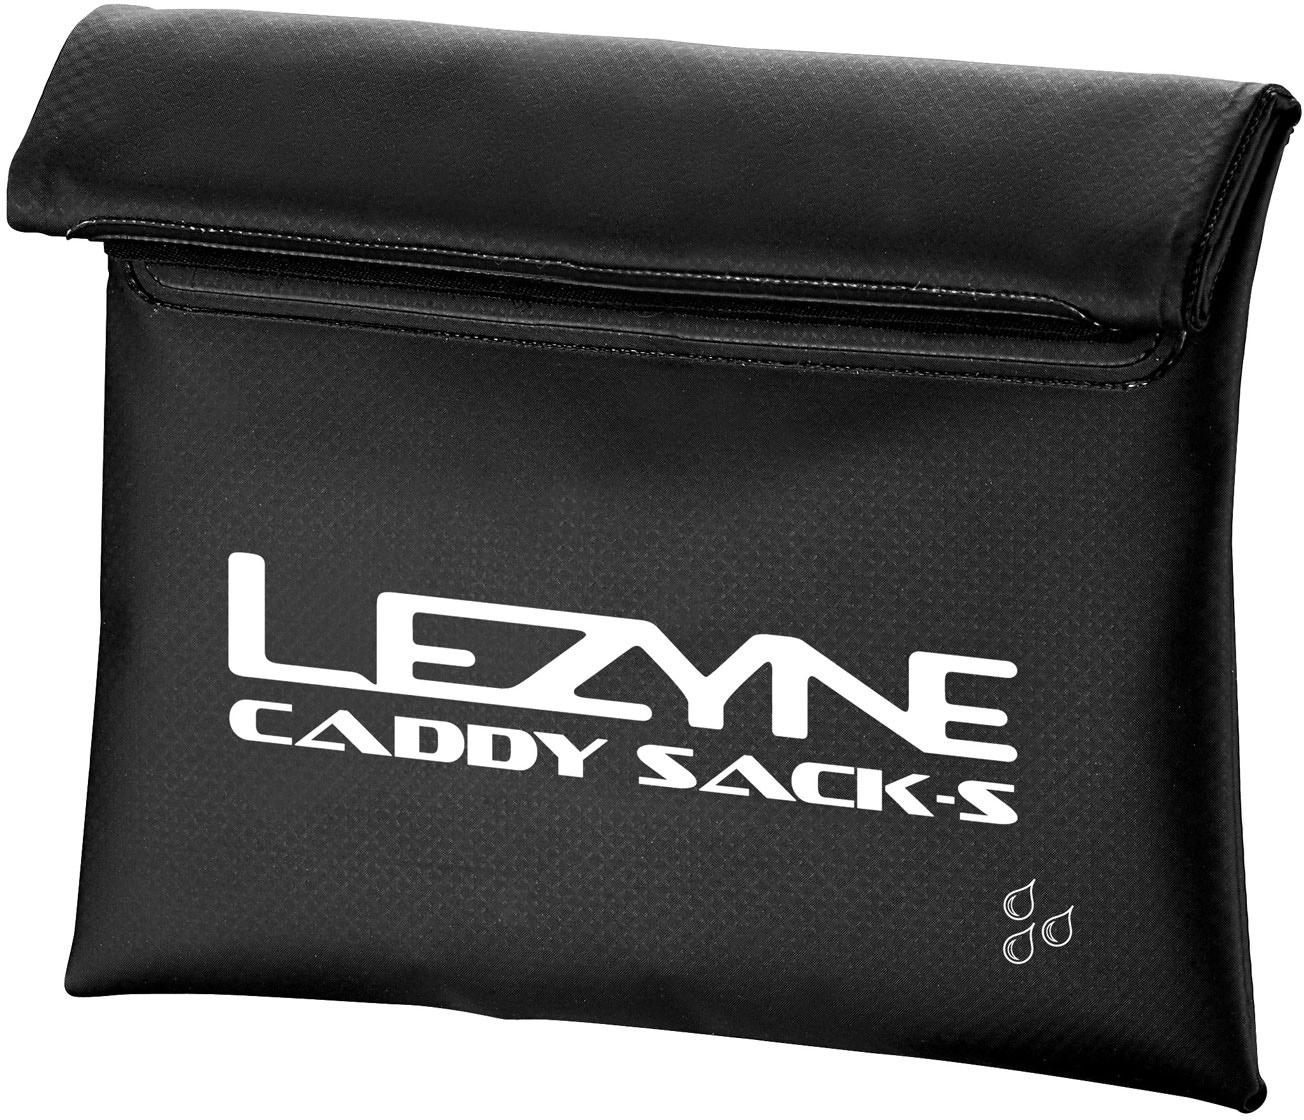 Lezyne Caddy Sack Cycling Pouch (small)  Black